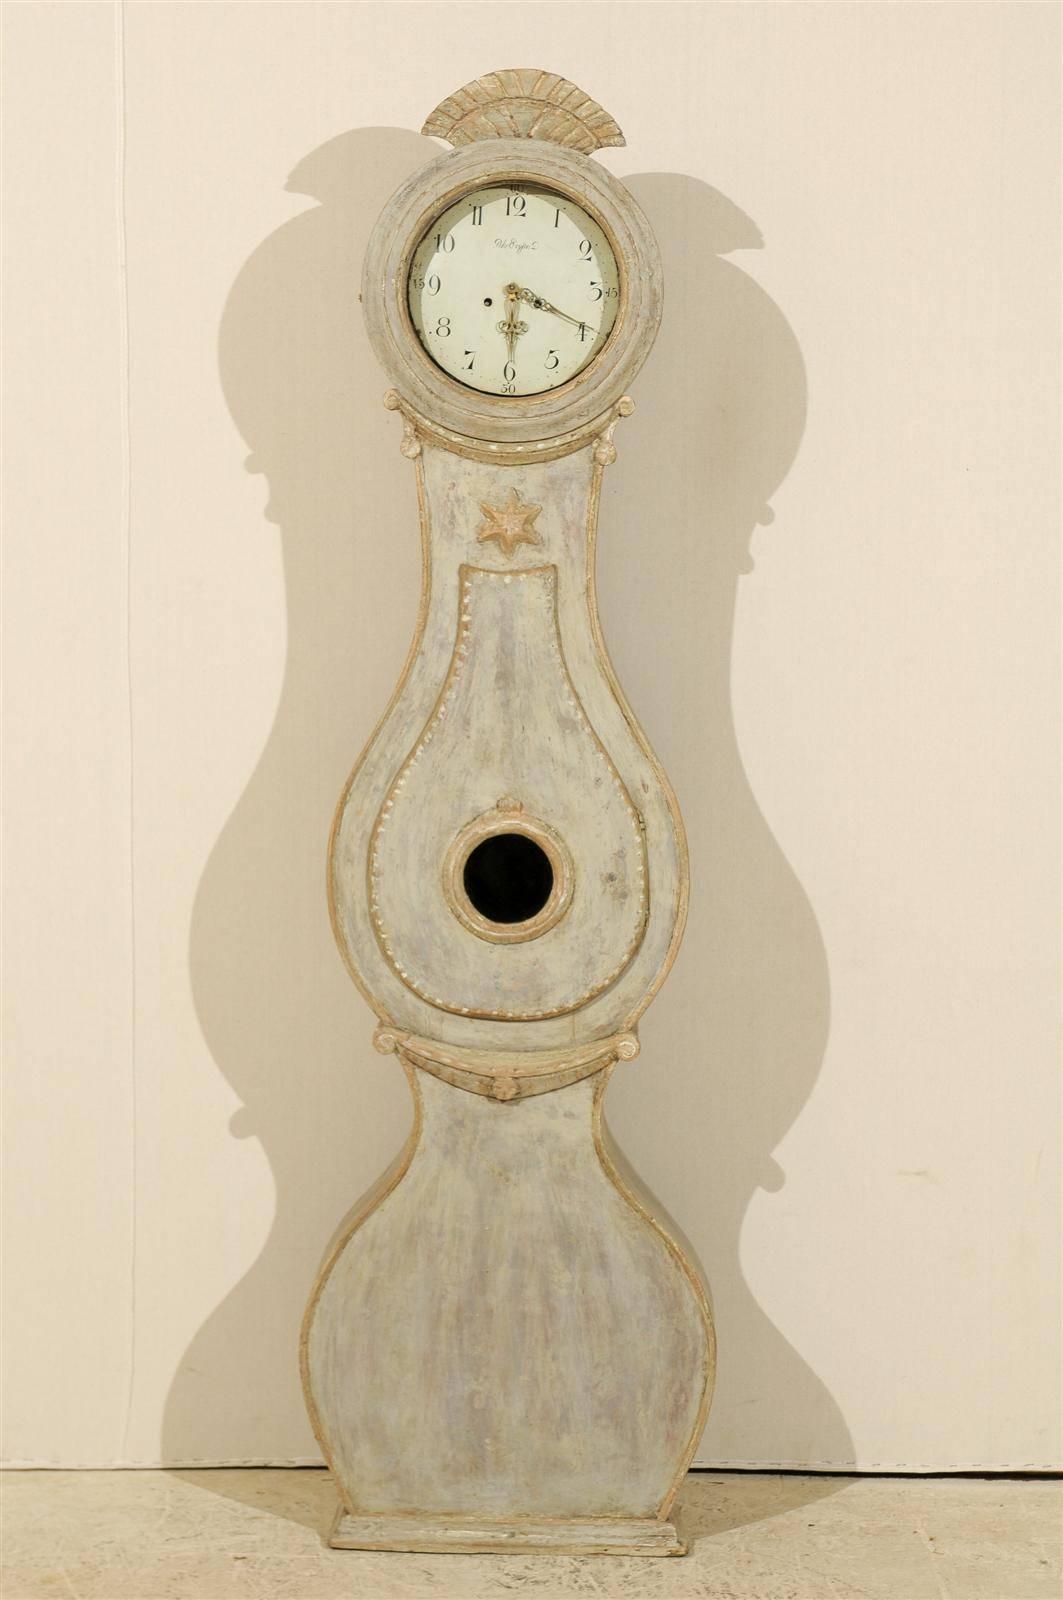 Gustavian A 19th Century Swedish Fryksdahl Floor Clock with Carved Crest and Star Motif